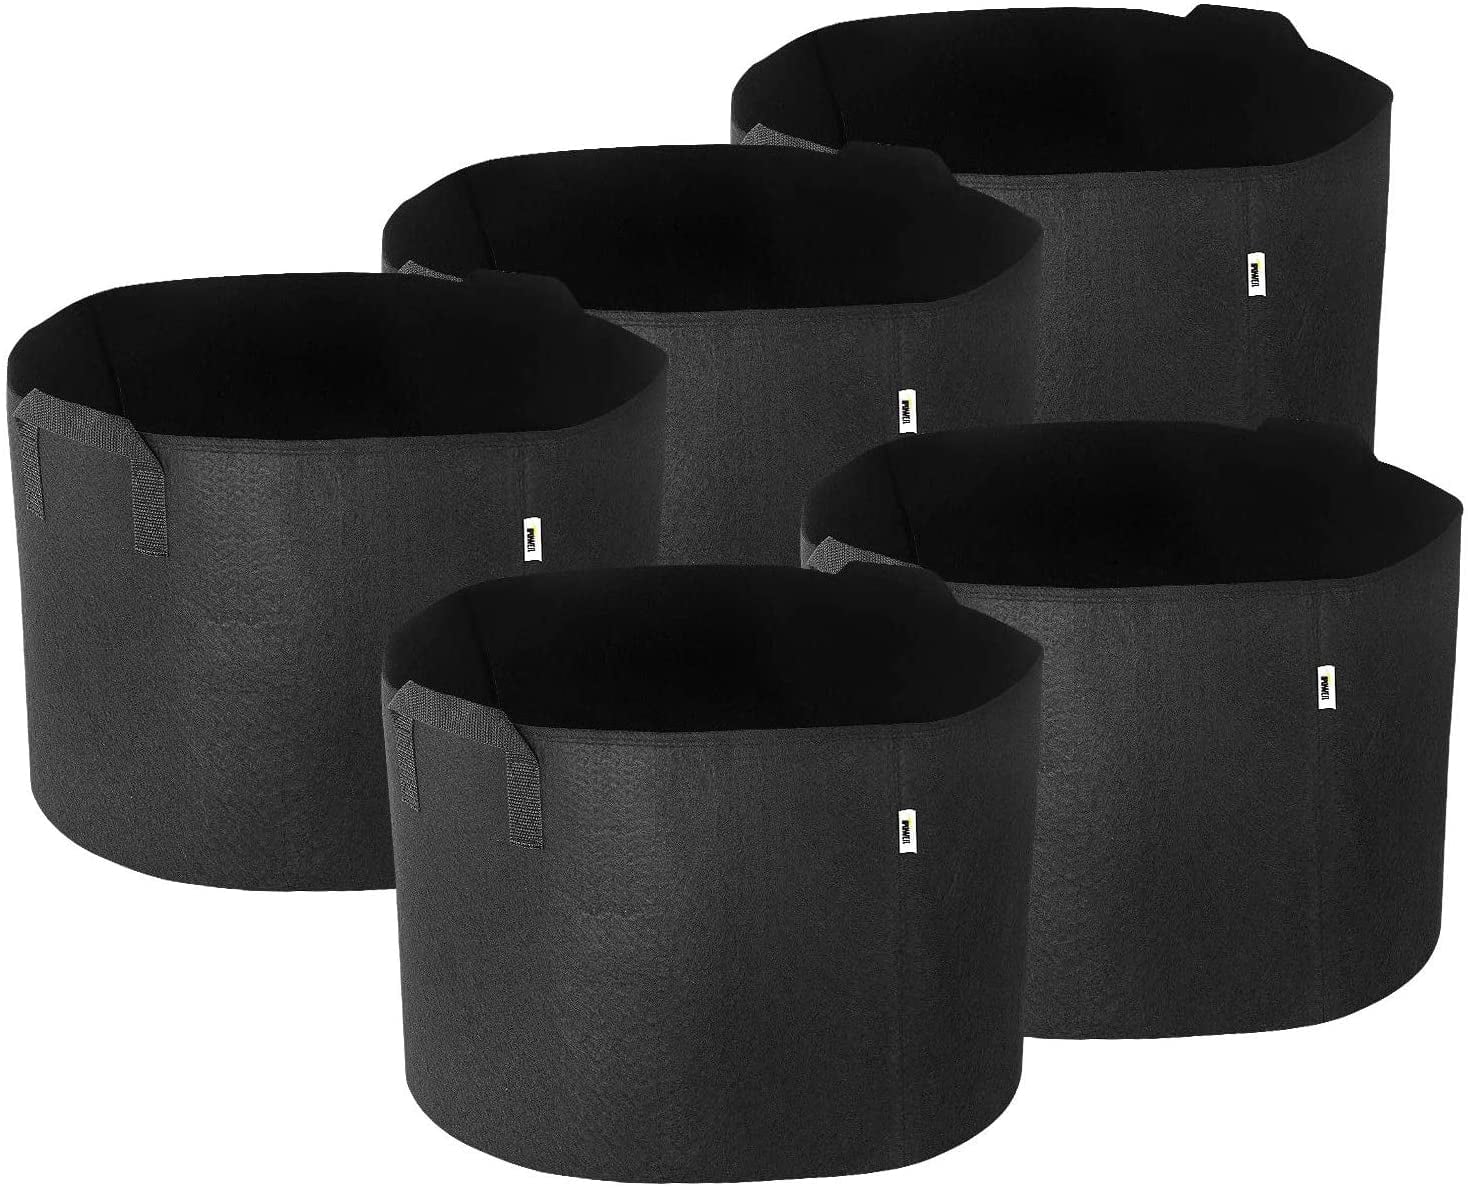 Lotfancy 5 Gallon Grow Bags, 7-Pack, Thickened Felt Fabric Pots with Reinforced Handles, Size: 5 Gallon, 7 Pack, Black